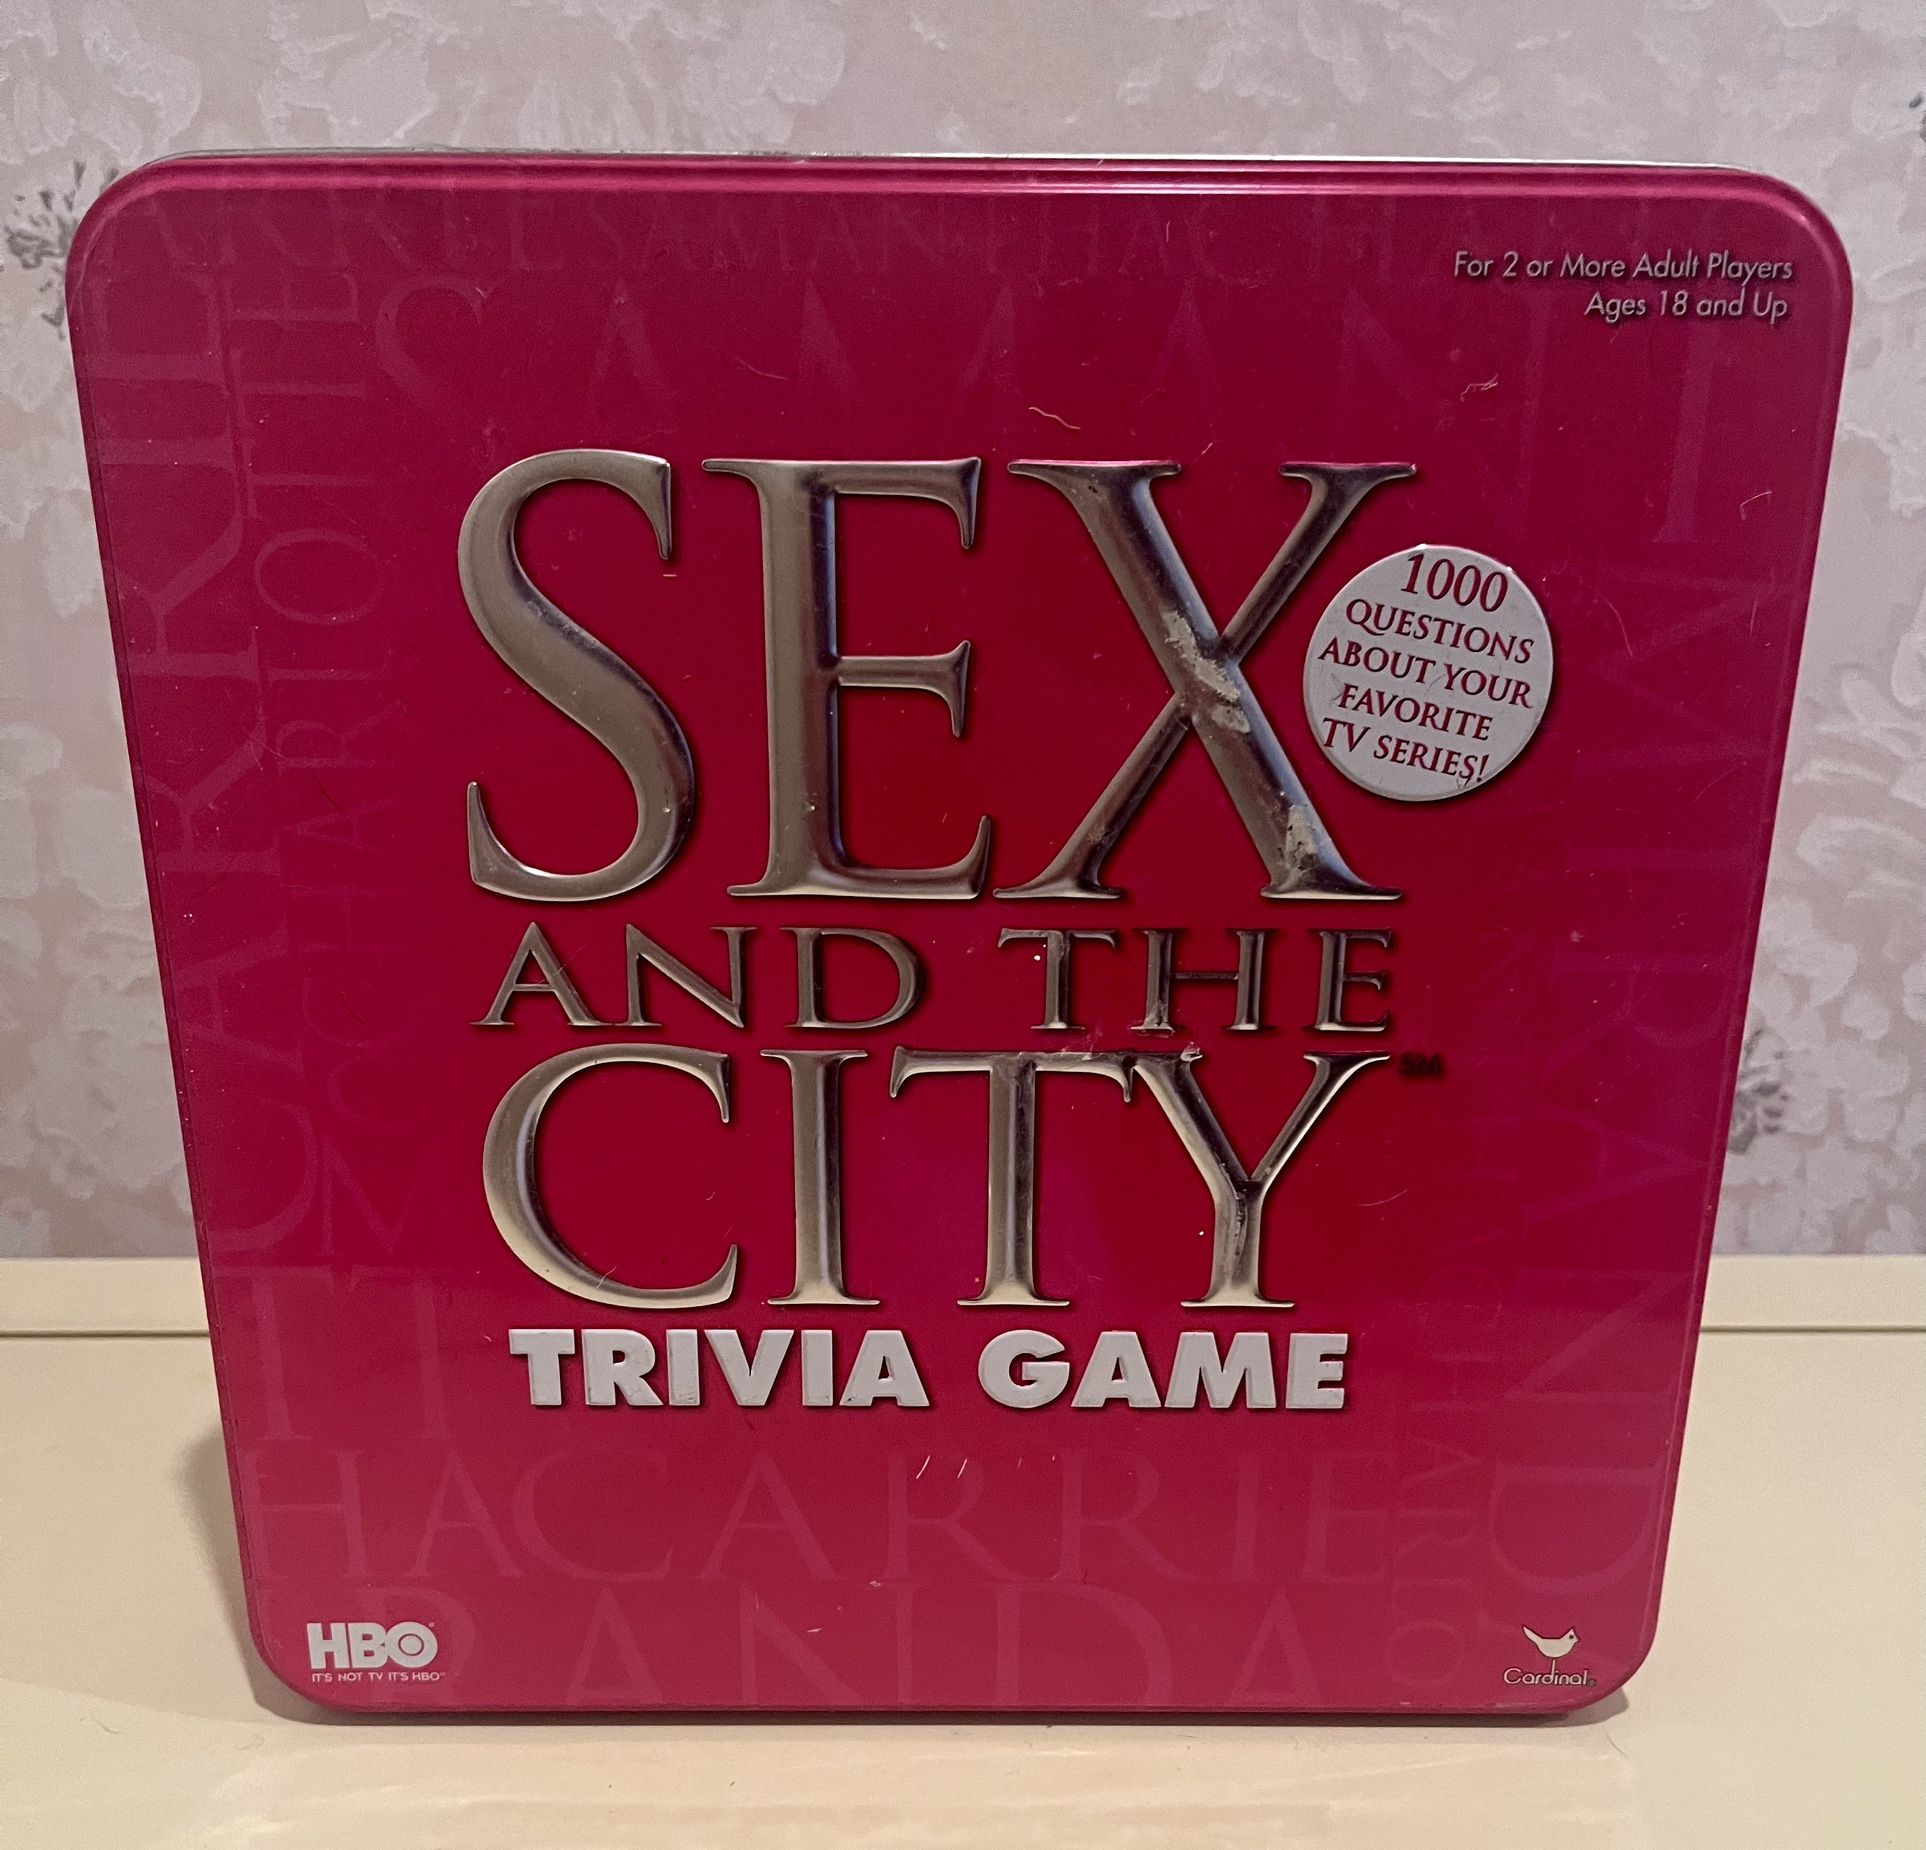 Sex and the City Trivia Game HBO TV Series Show Board Game New in Sealed Tin Box